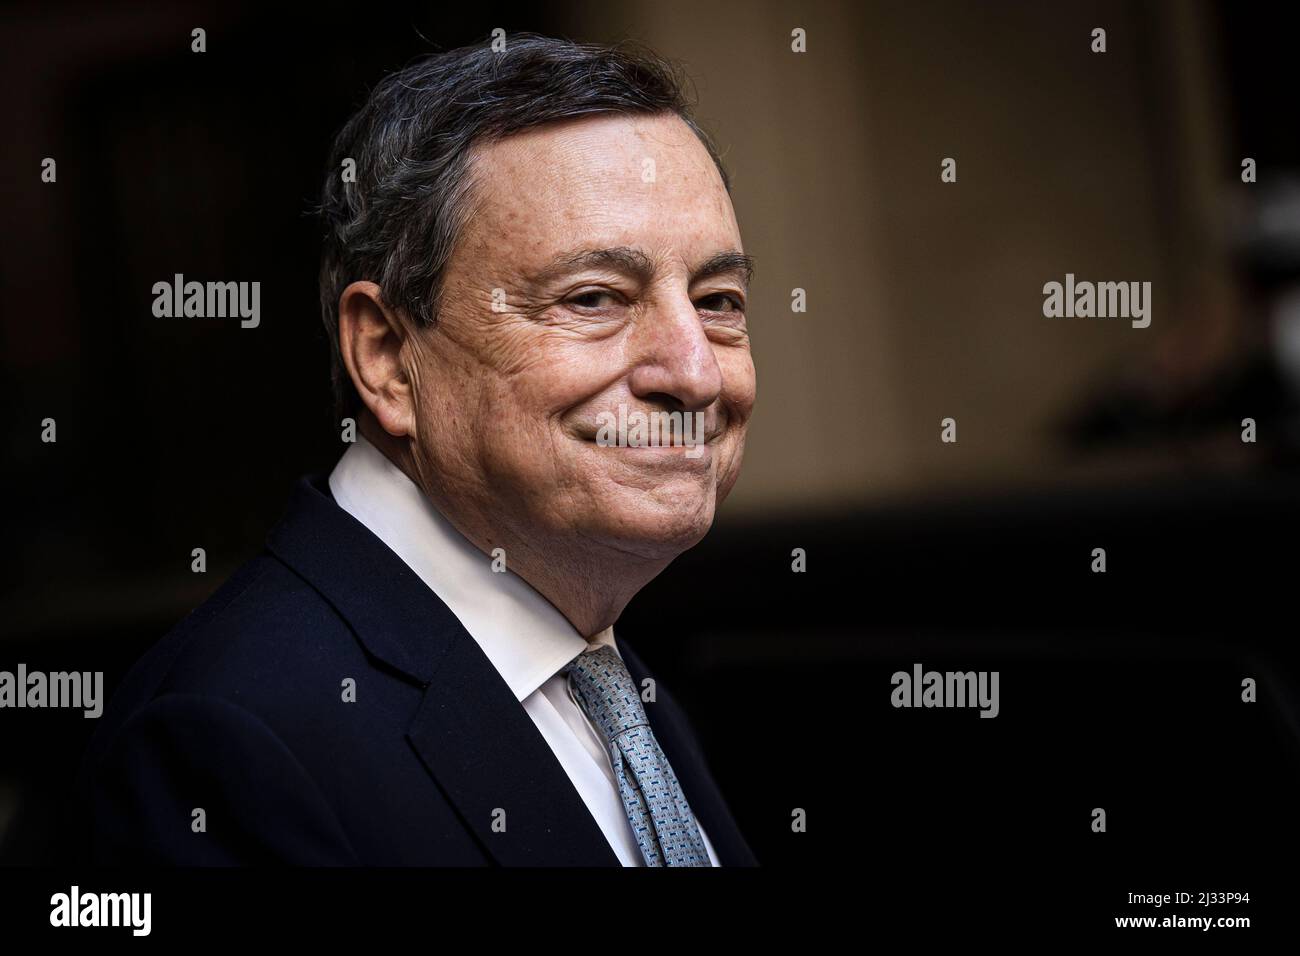 Turin, Italy. 05 April 2022. Prime Minister of Italy Mario Draghi smiles during his visit to Turin where he signed the so called 'Patto per Torino'. The municipality of Turin will receive from the Italian government over one billion euros over 20 years. Credit: Nicolò Campo/Alamy Live News Stock Photo